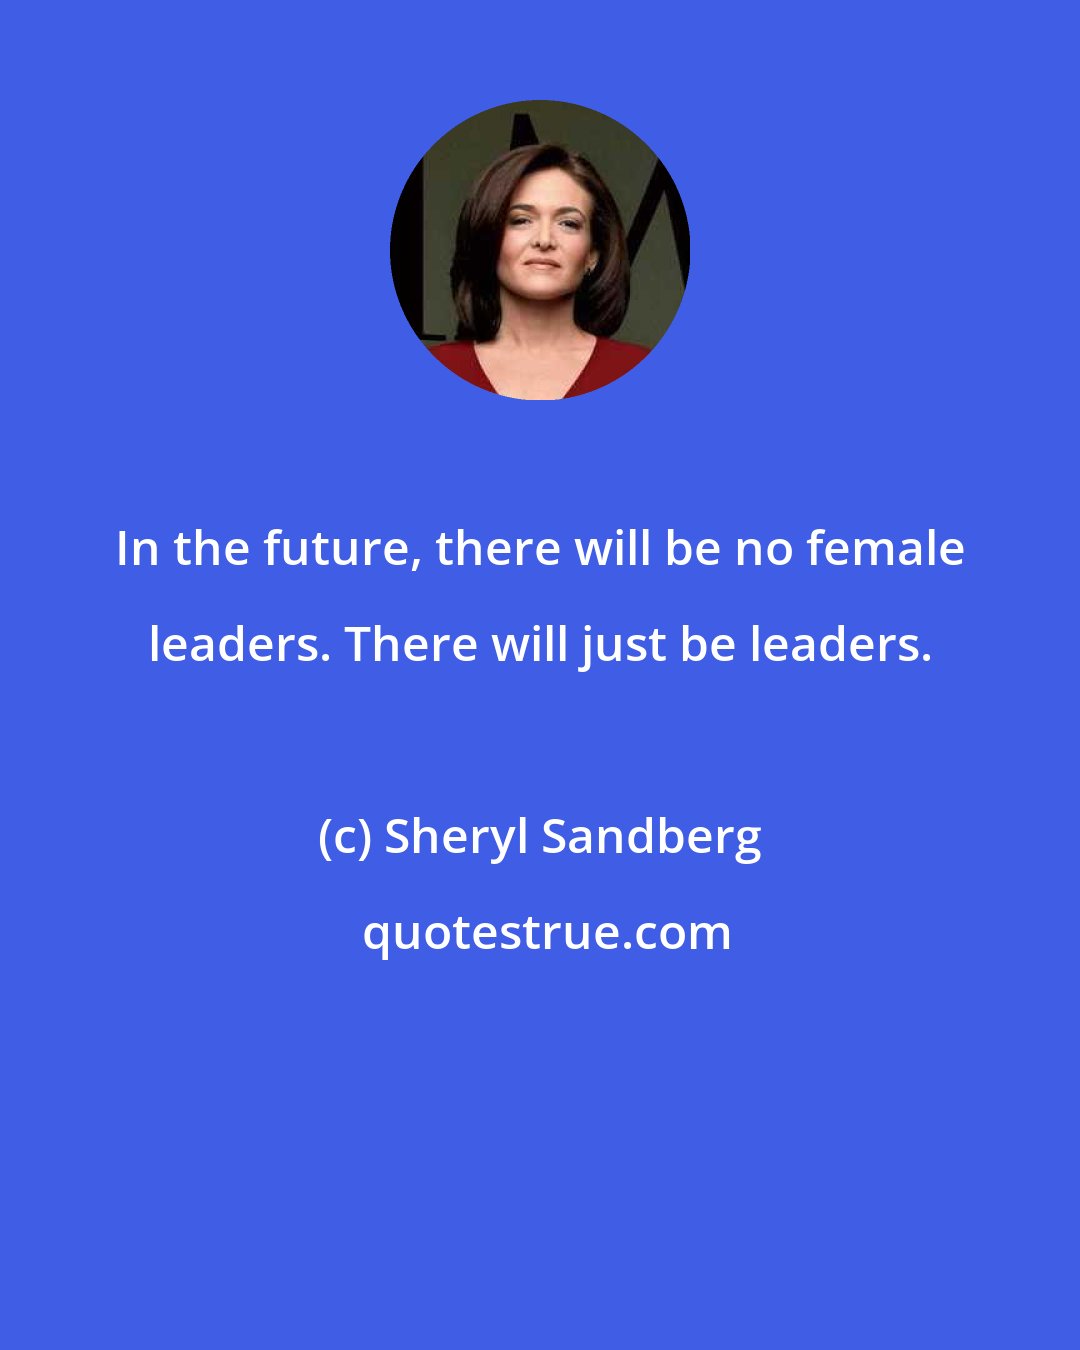 Sheryl Sandberg: In the future, there will be no female leaders. There will just be leaders.